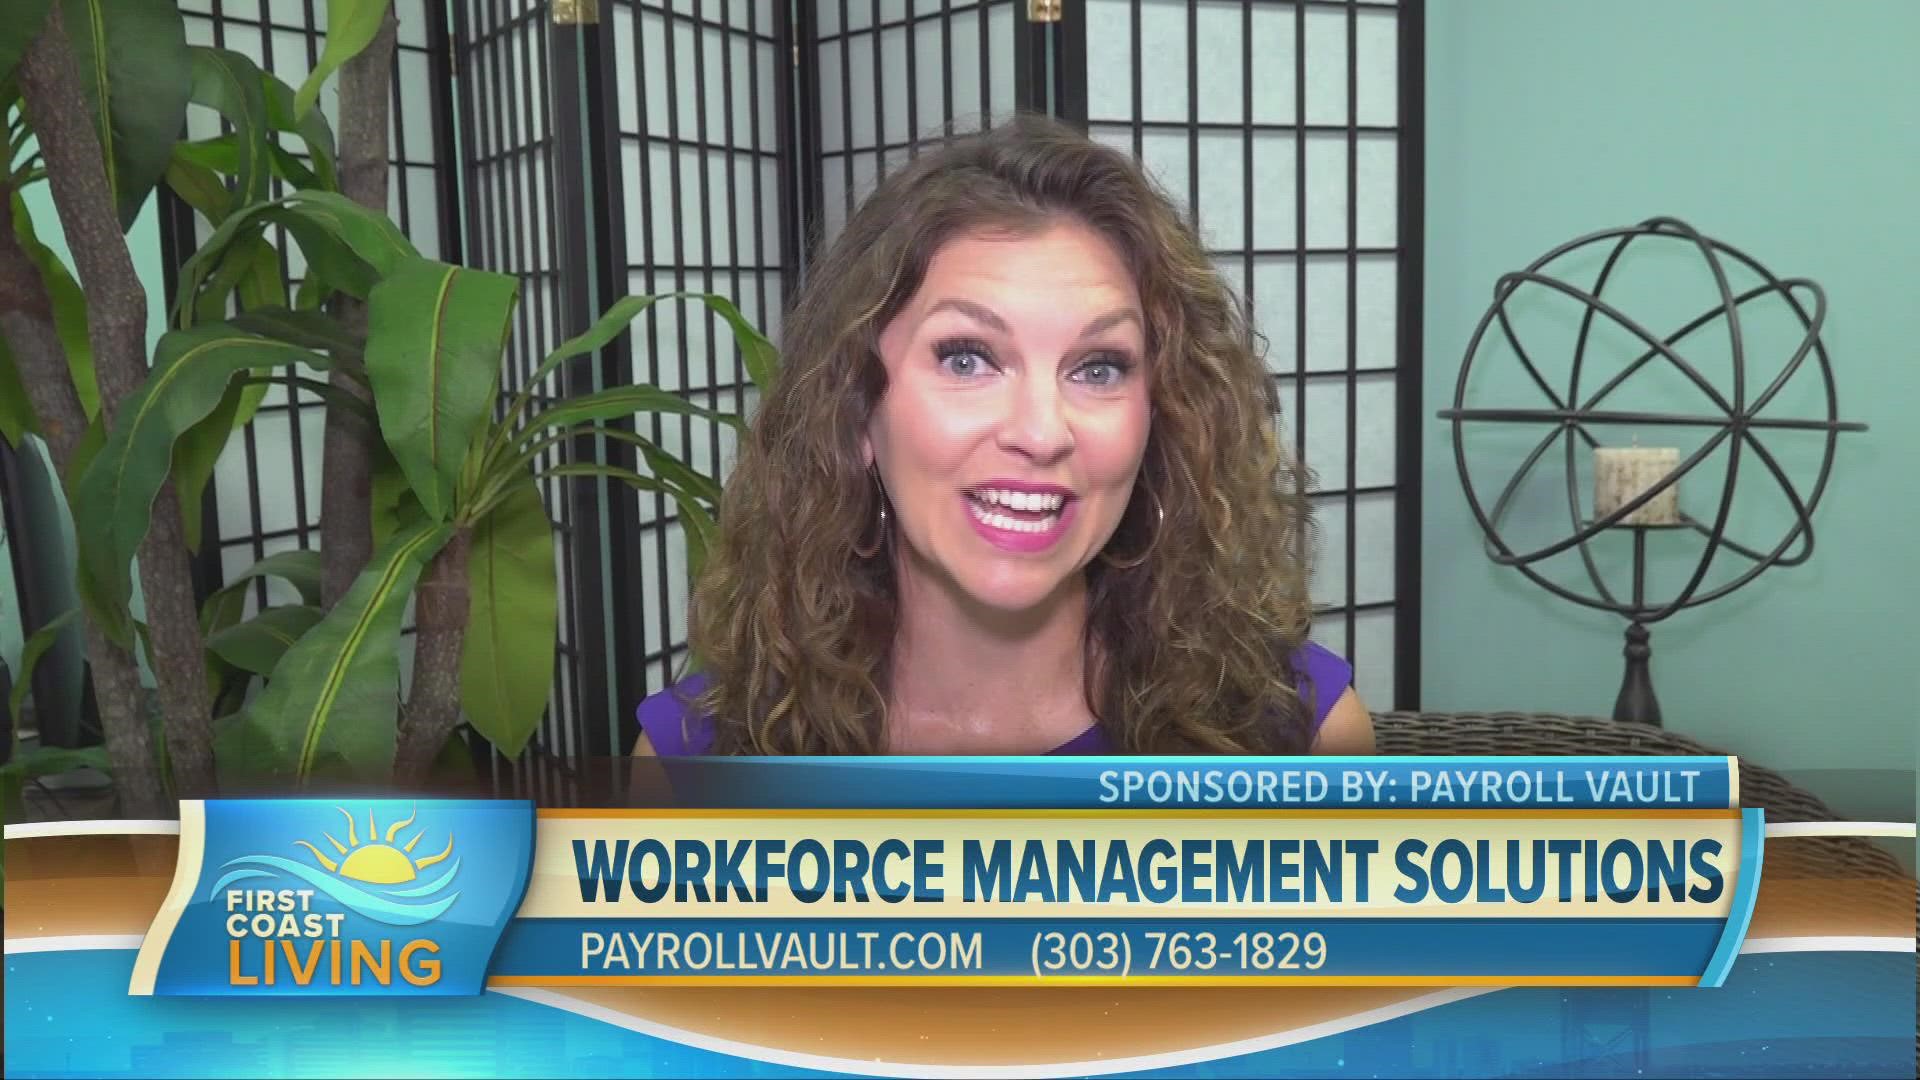 The Payroll Vault franchise opportunity allows entrepreneurs to launch a service-driven franchise that is recession-resilient and increasingly in high demand.